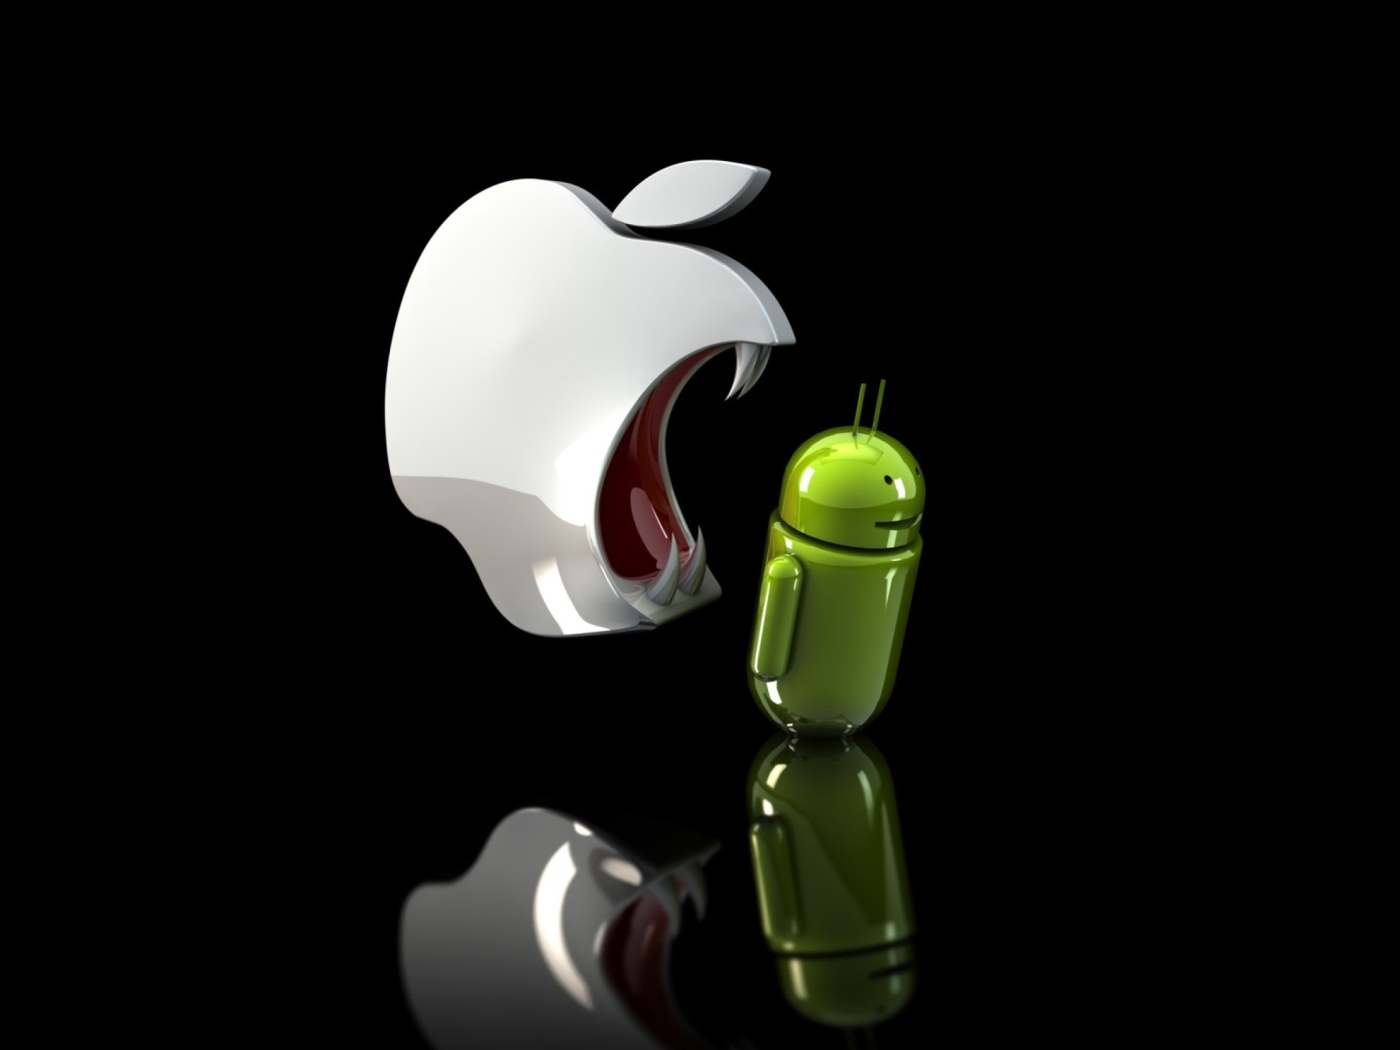 Das Apple Against Android Wallpaper 1400x1050